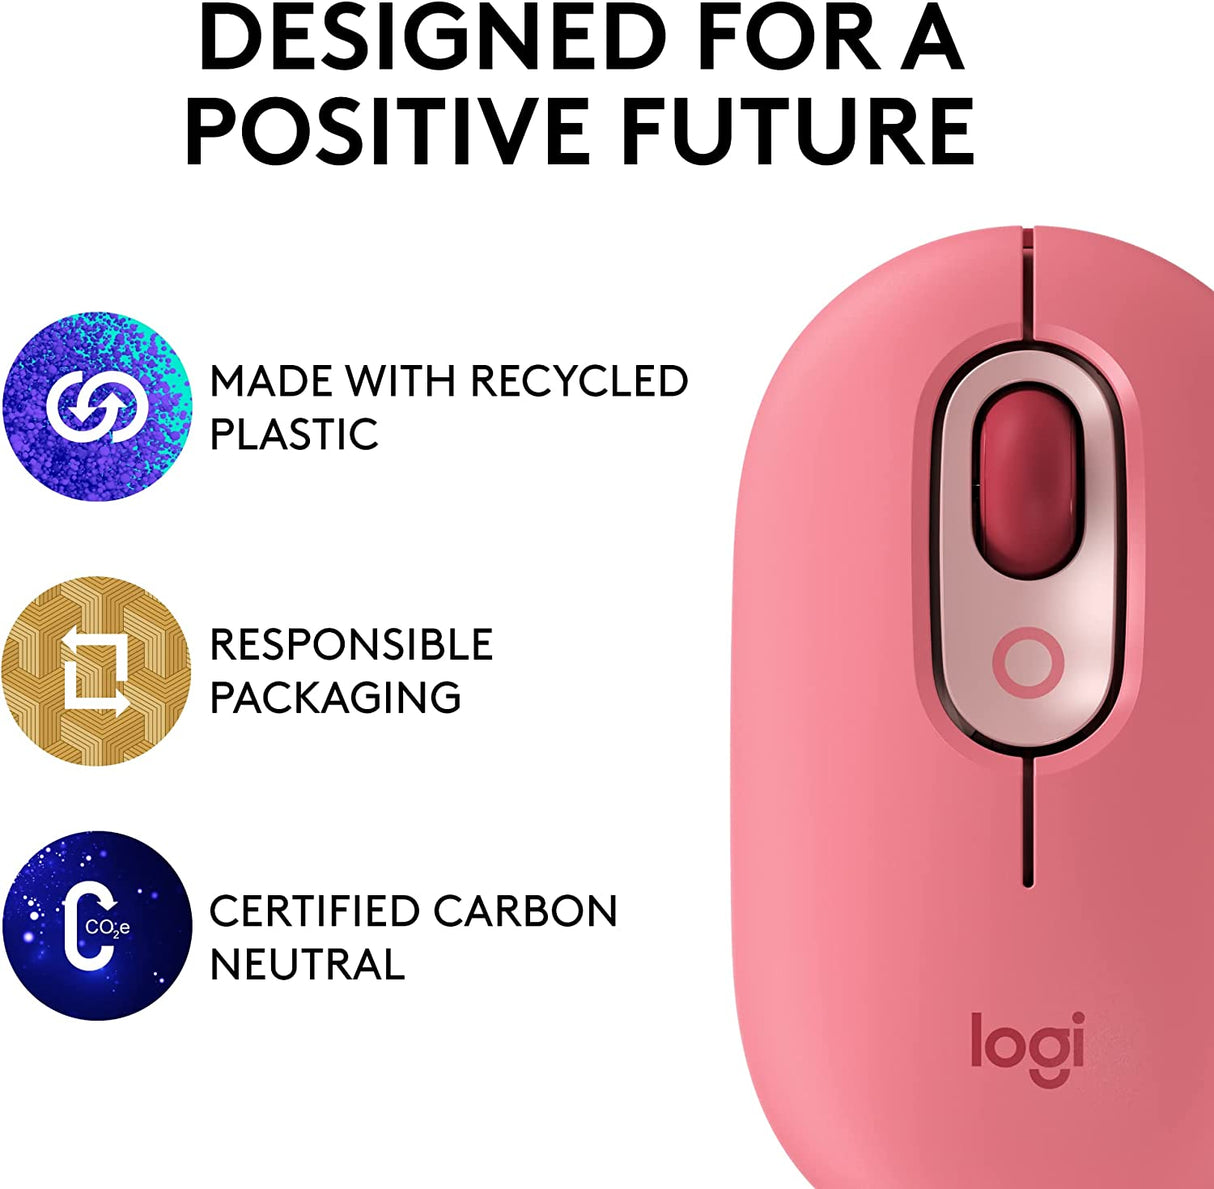 Logitech POP Mouse, Wireless Mouse with Customisable Emojis, SilentTouch Technology, Precision/Speed Scroll, Compact Design, Bluetooth, Multi-Device, OS Compatible